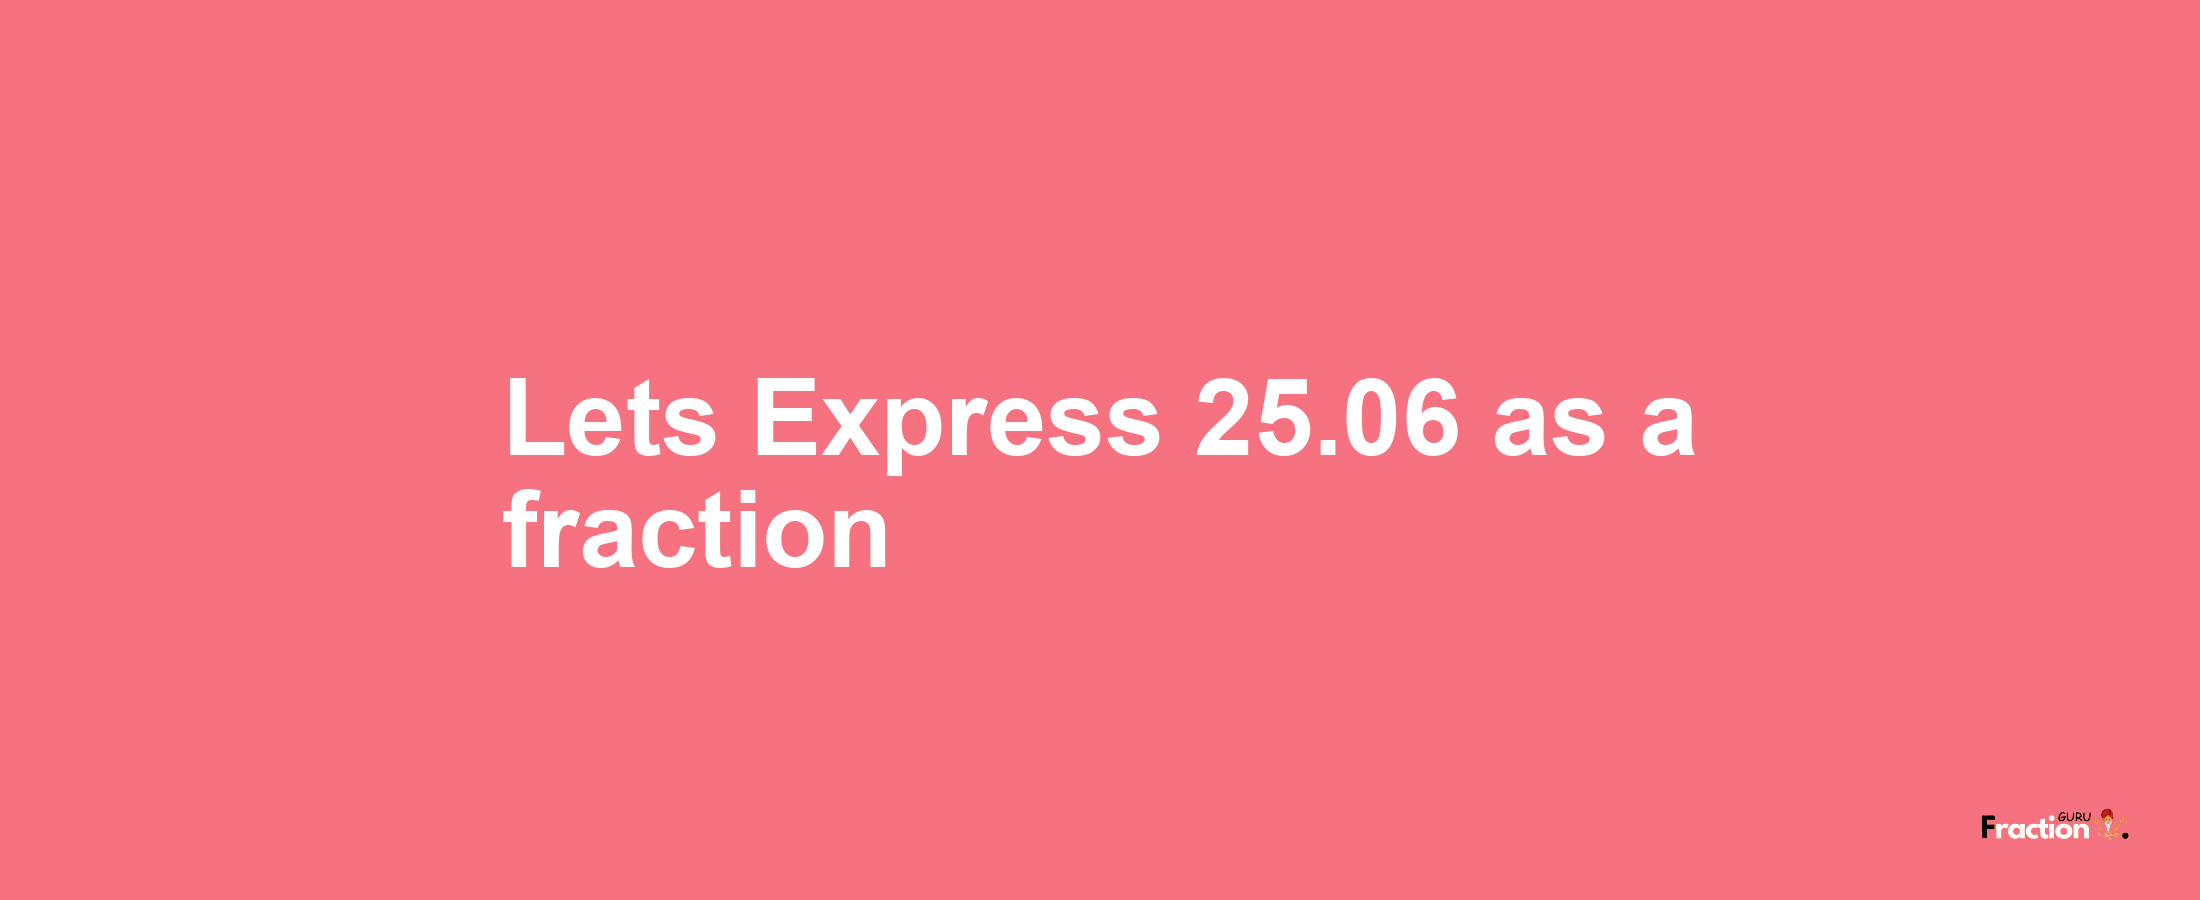 Lets Express 25.06 as afraction